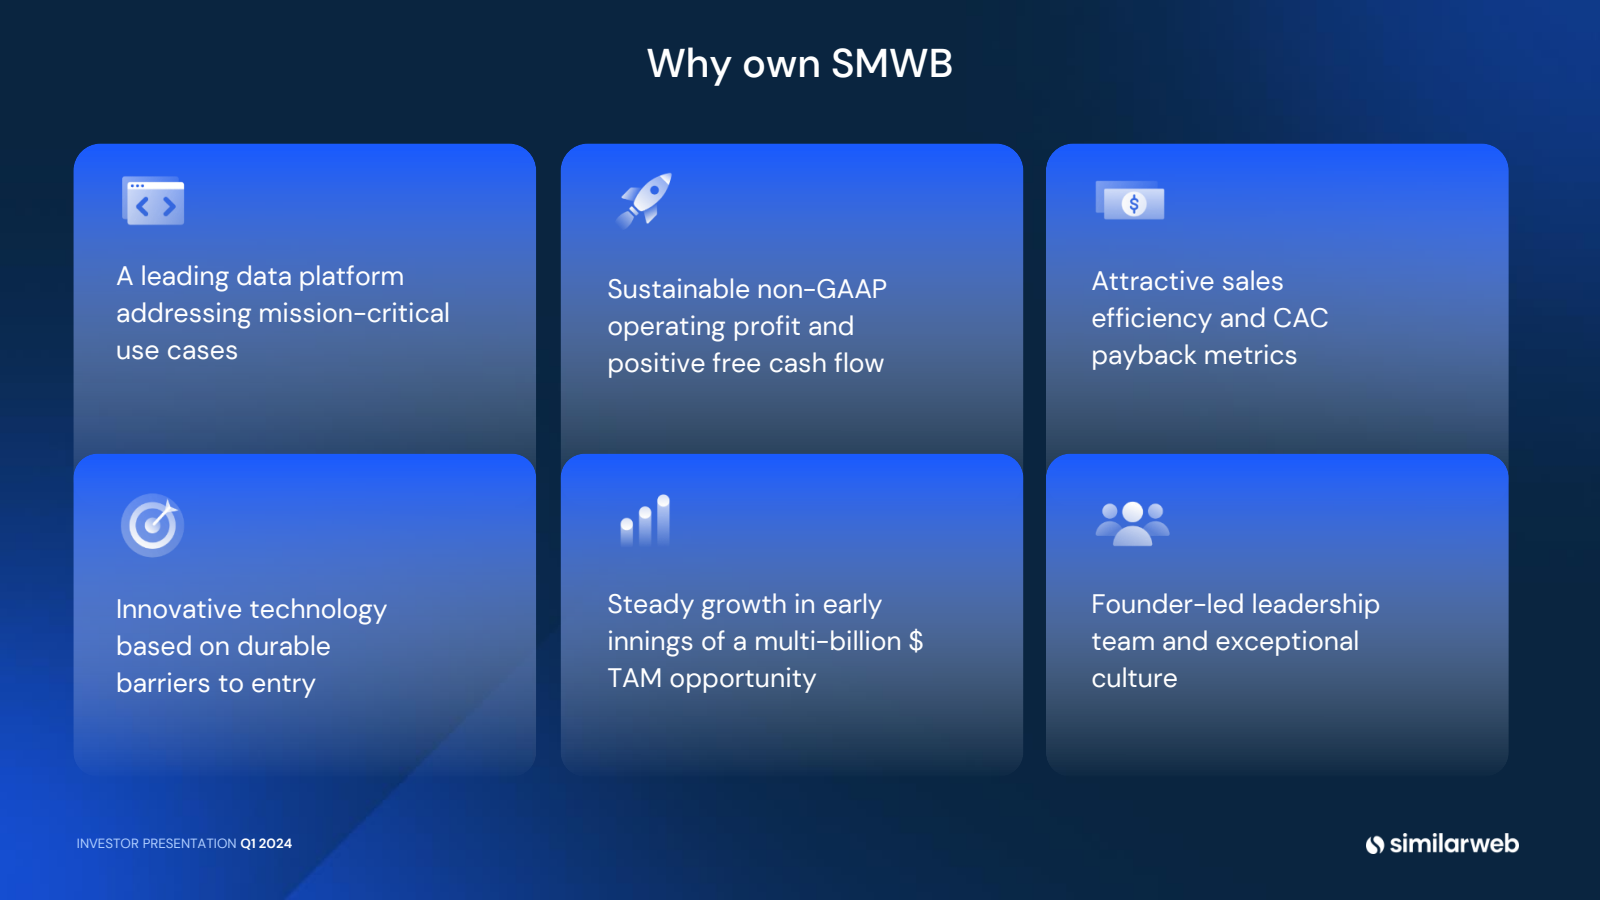 Why own SMWB 

$ 

A